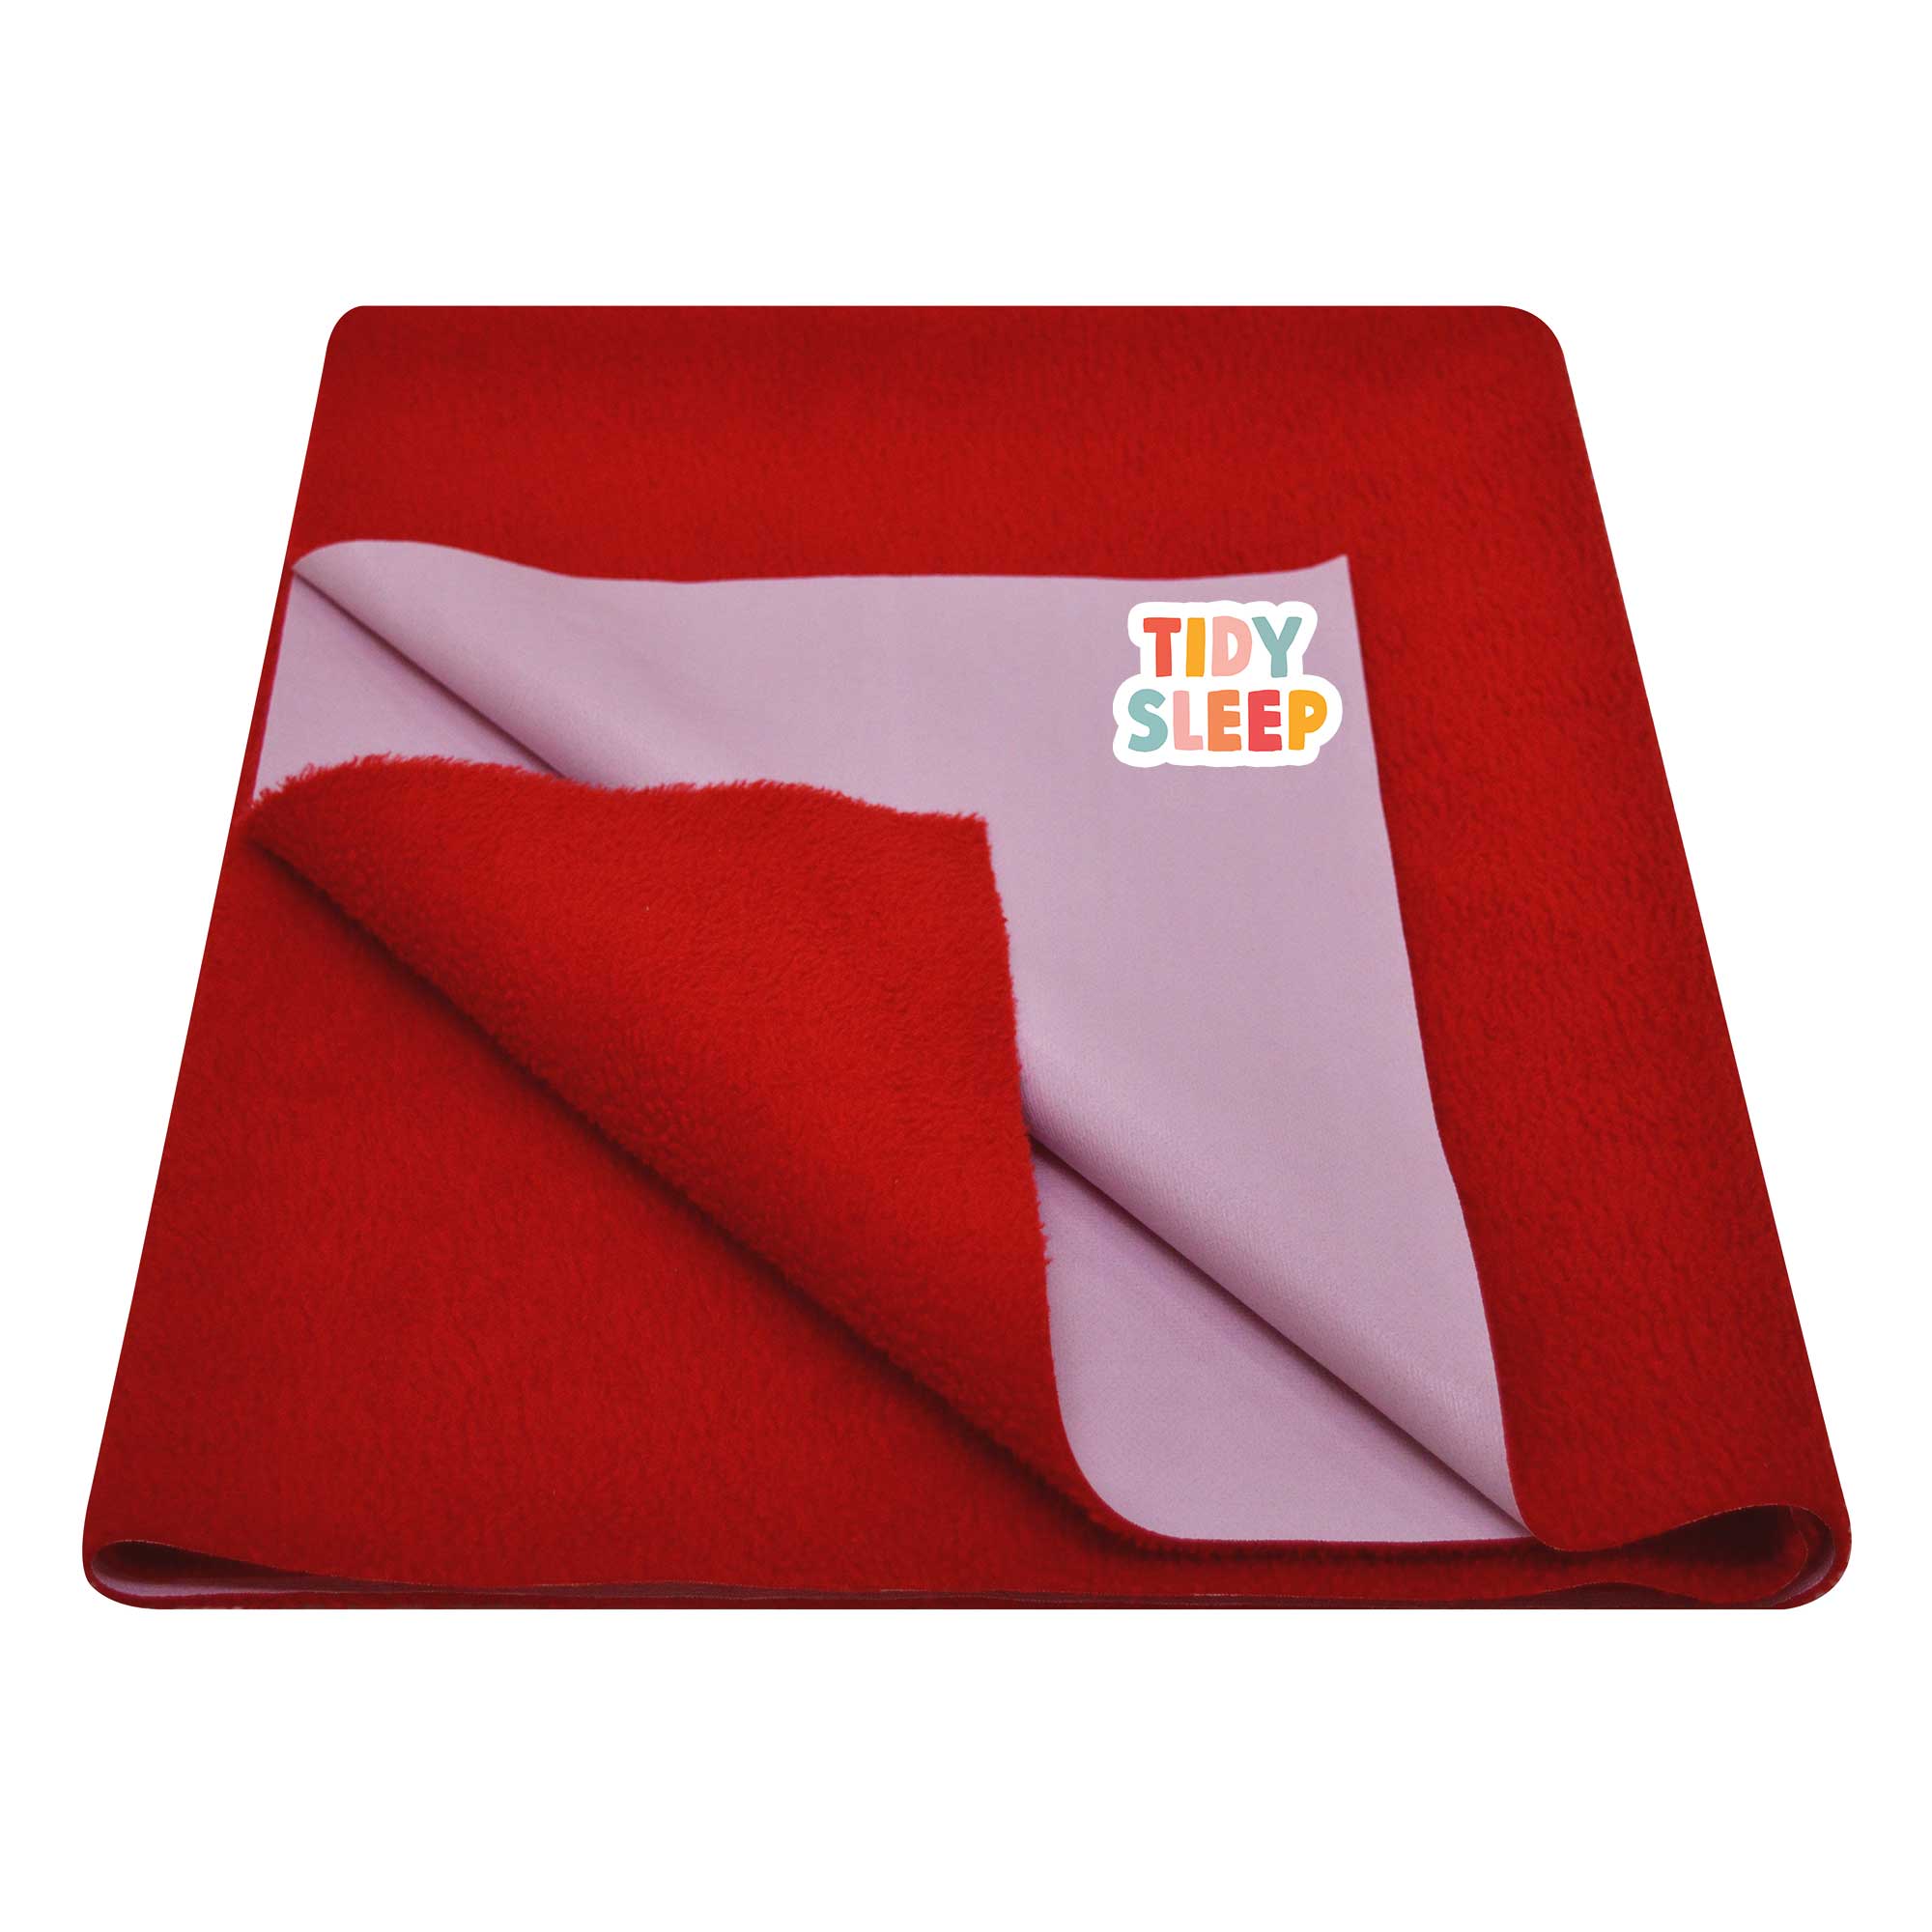 Tidy Sleep Waterproof Baby Bed Protector Dry Sheet For New Born Babies - Red